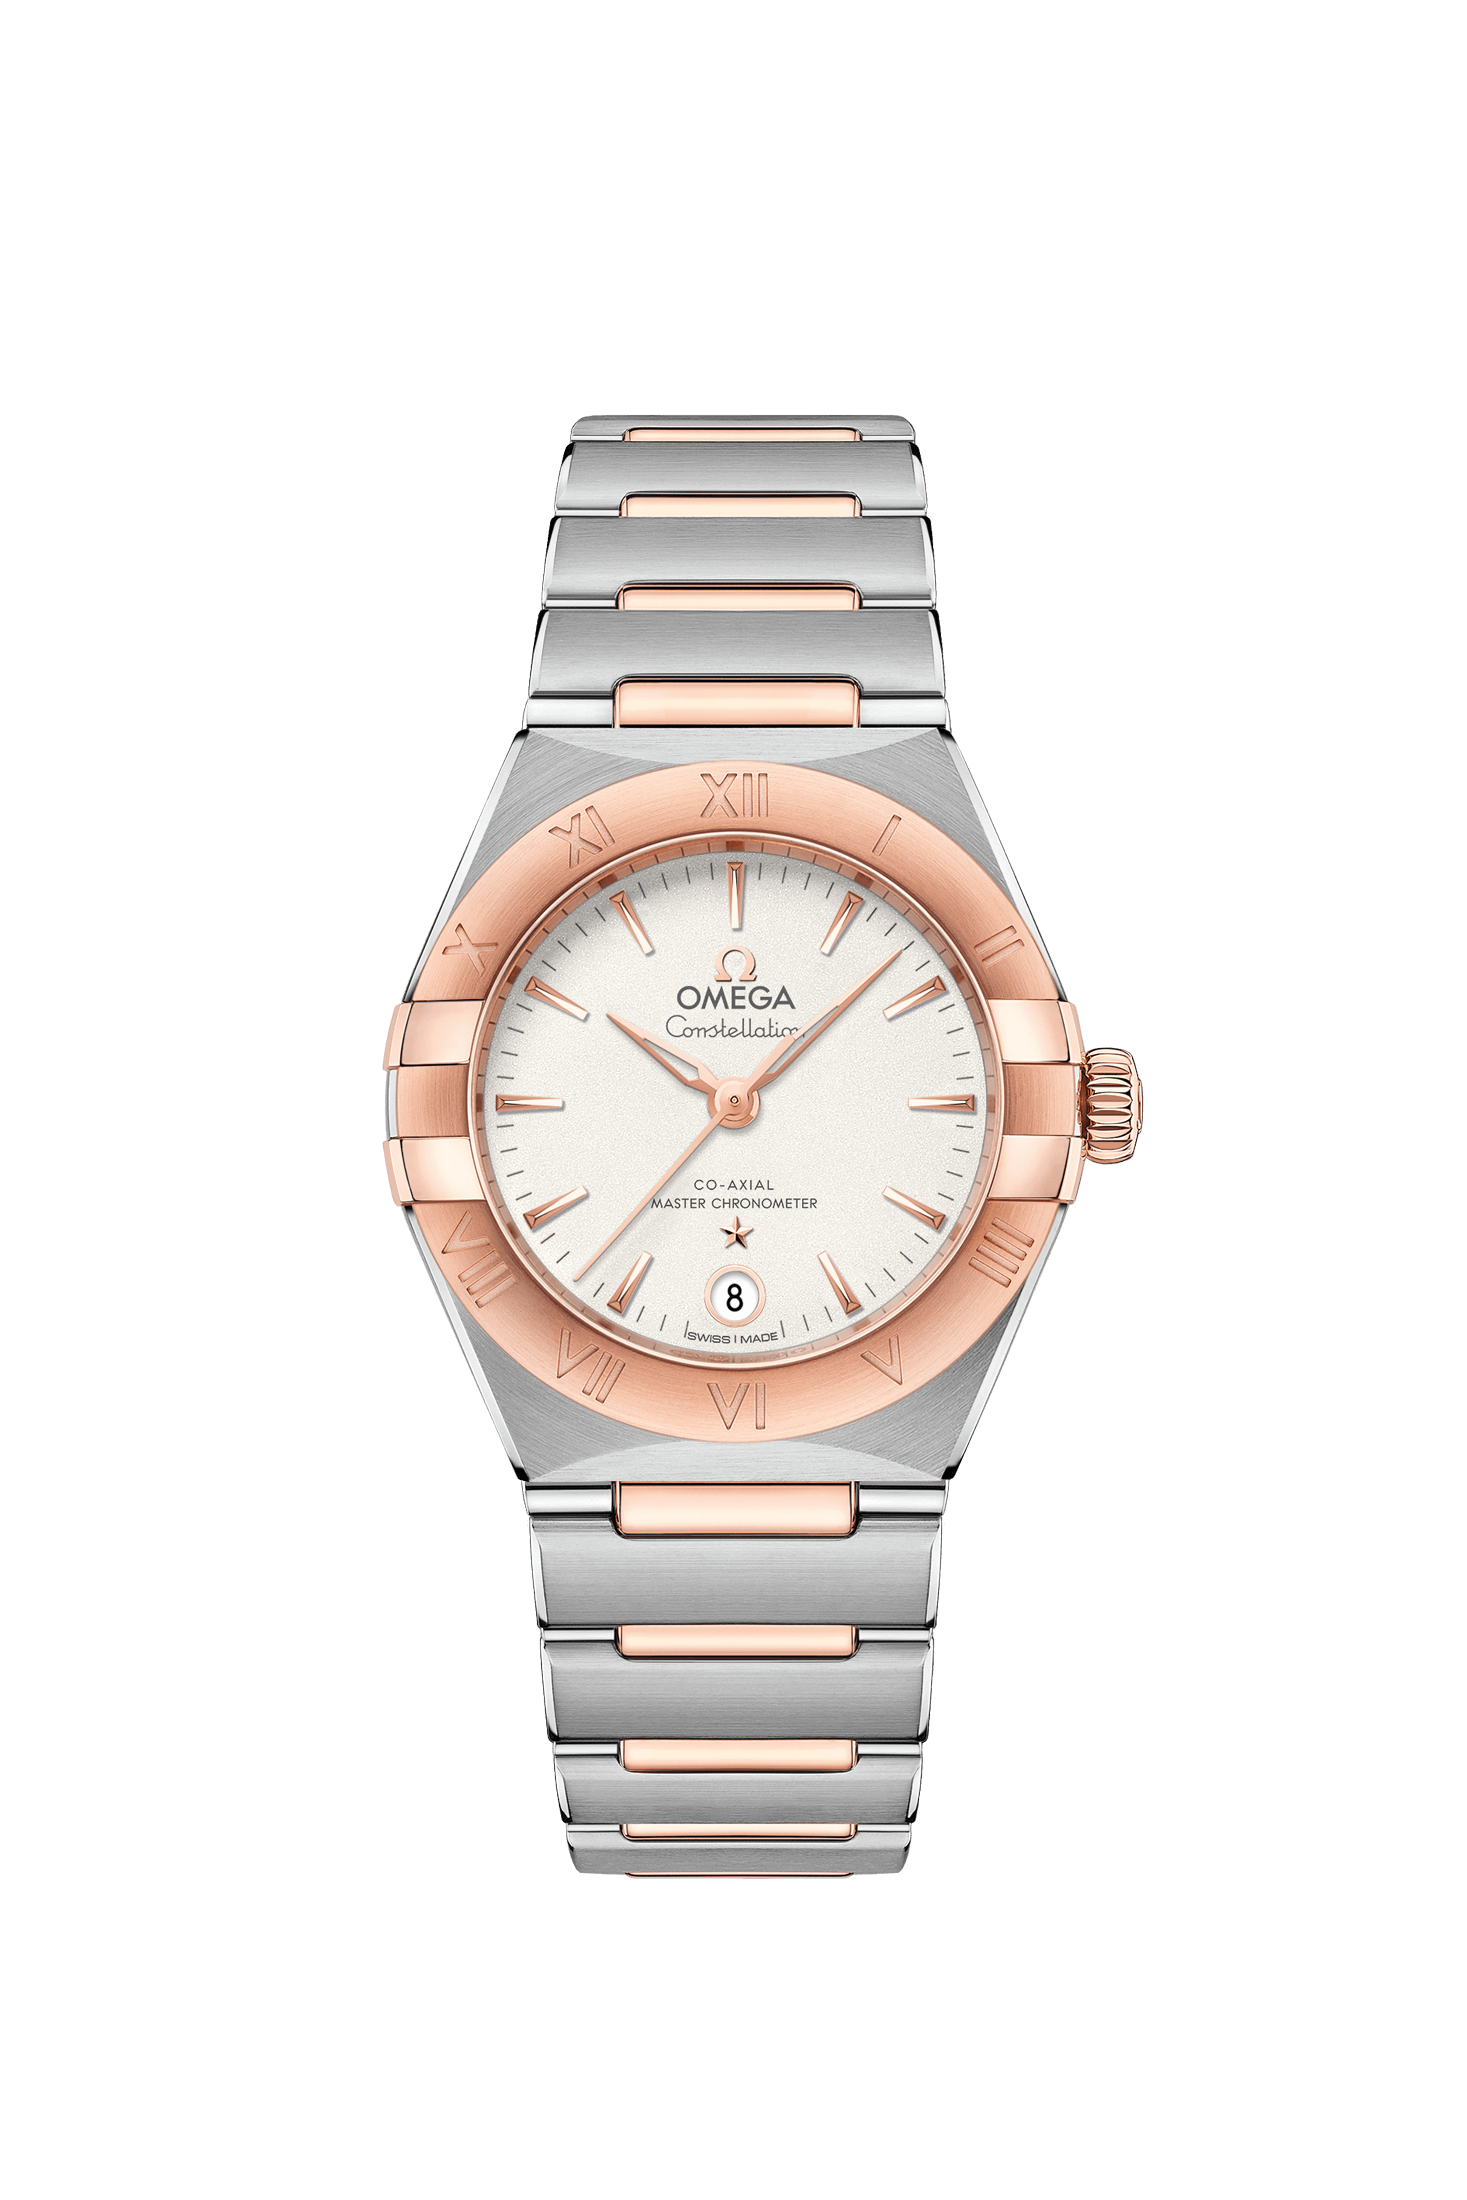 Ladies' watch  OMEGA, Constellation Co Axial Master Chronometer / 29mm, SKU: 131.20.29.20.02.001 | watchapproach.com